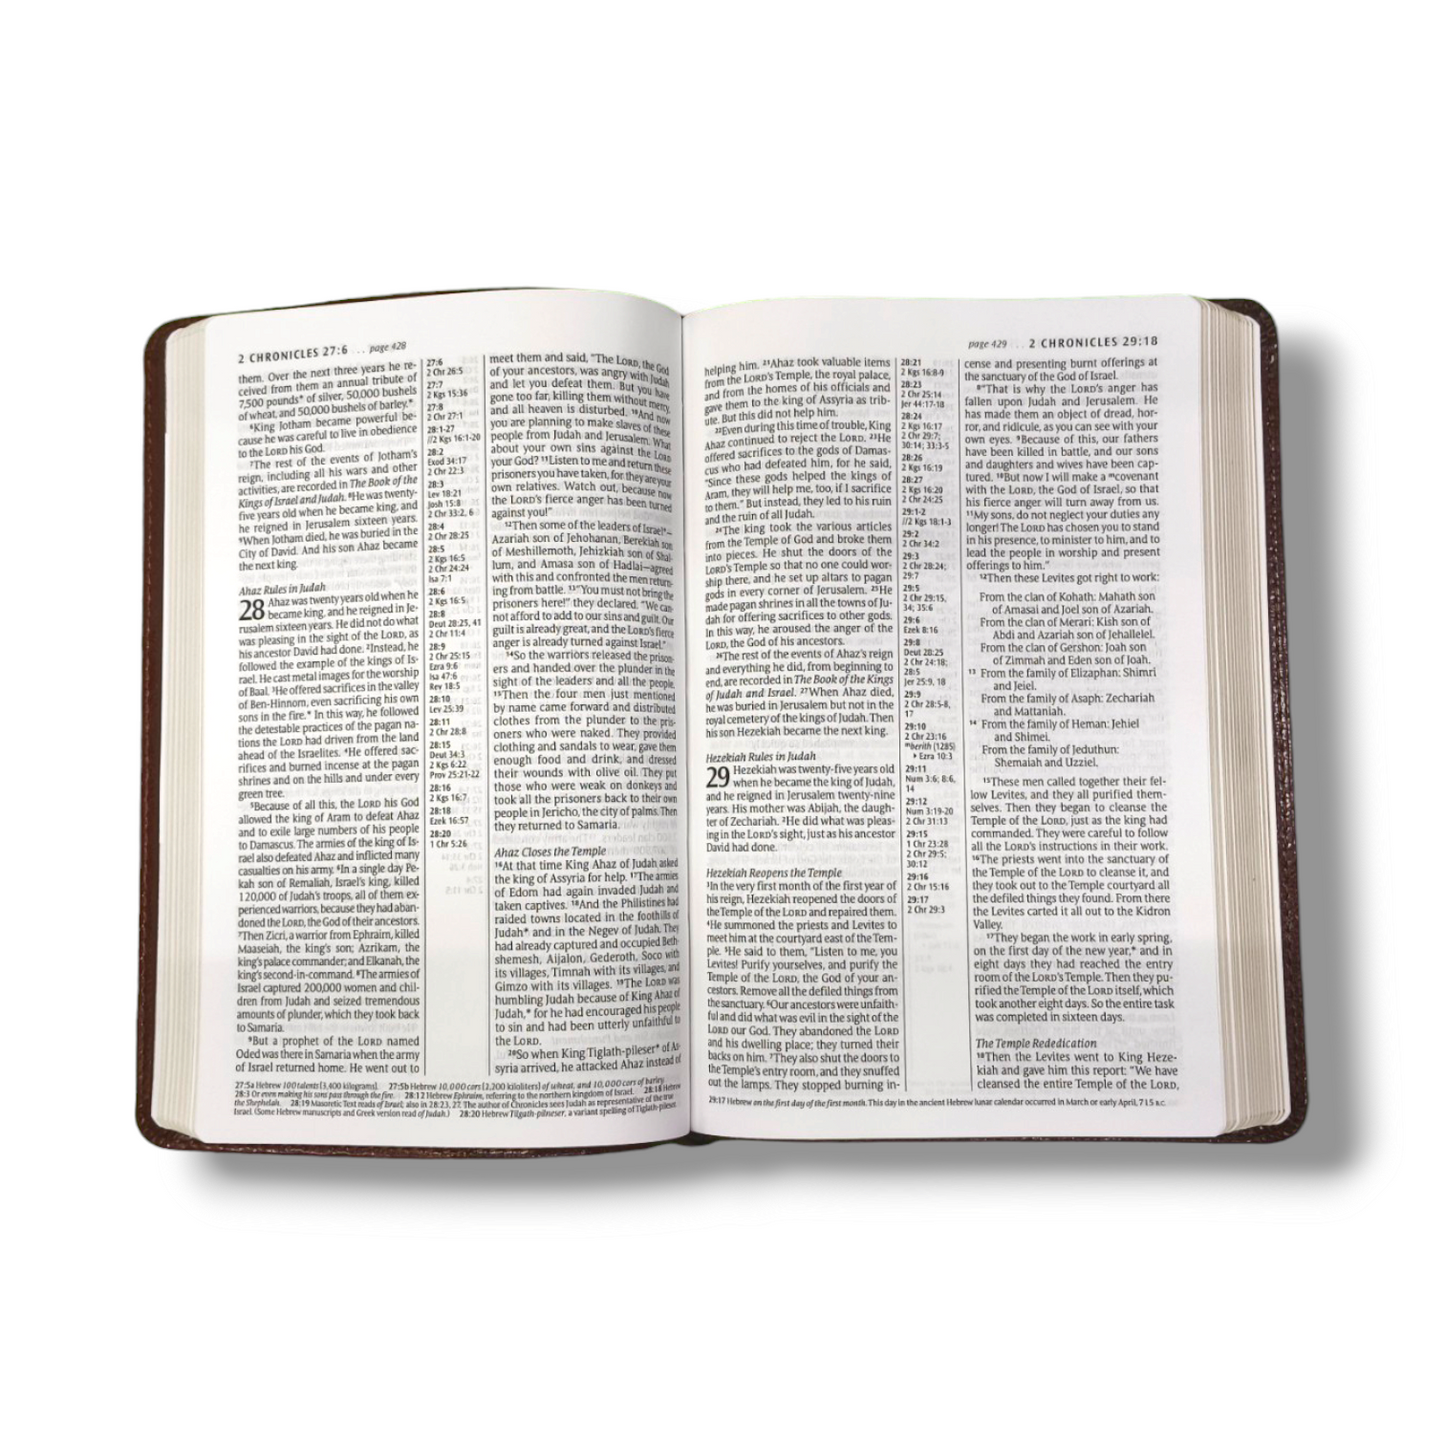 NLT Slimline Center Column | Reference Bible | Brown Leather Attractive Design Edition | Large Print | With Red Letter Edition | New Edition